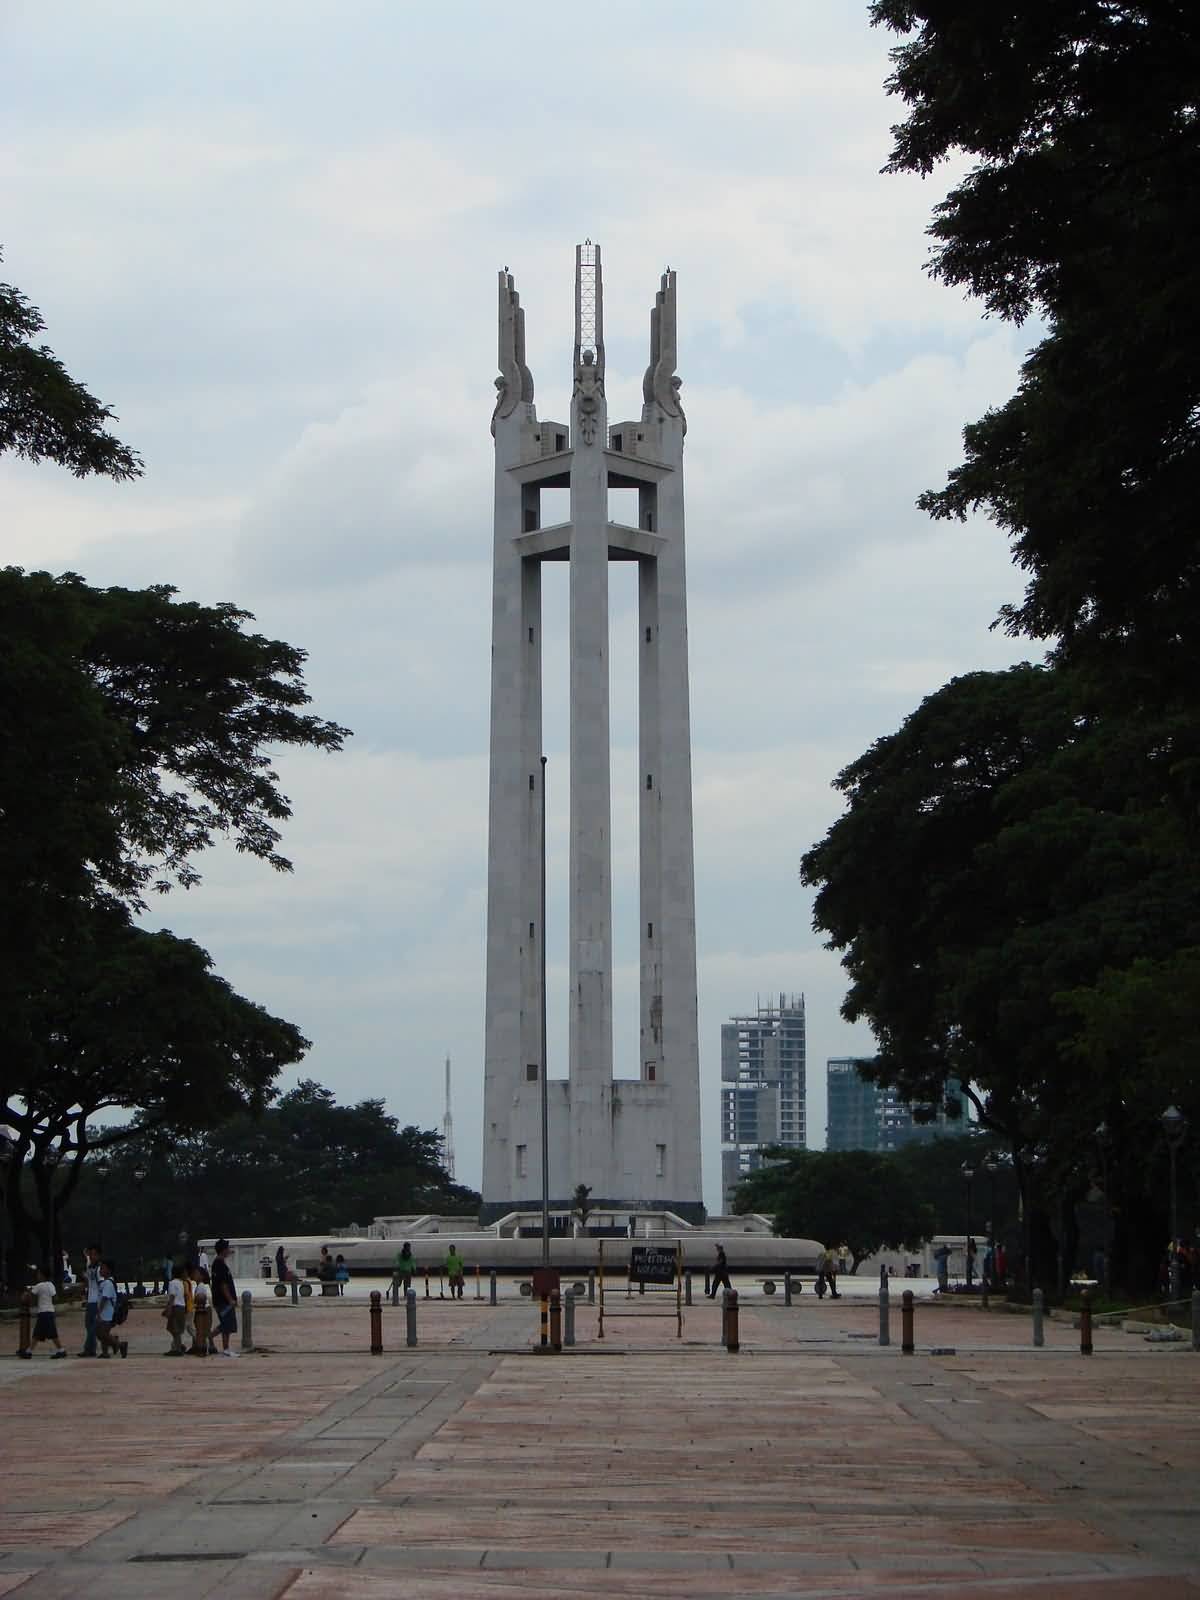 55+ Incredible Pictures And Photos Of Quezon Memorial Shrine In Philippines